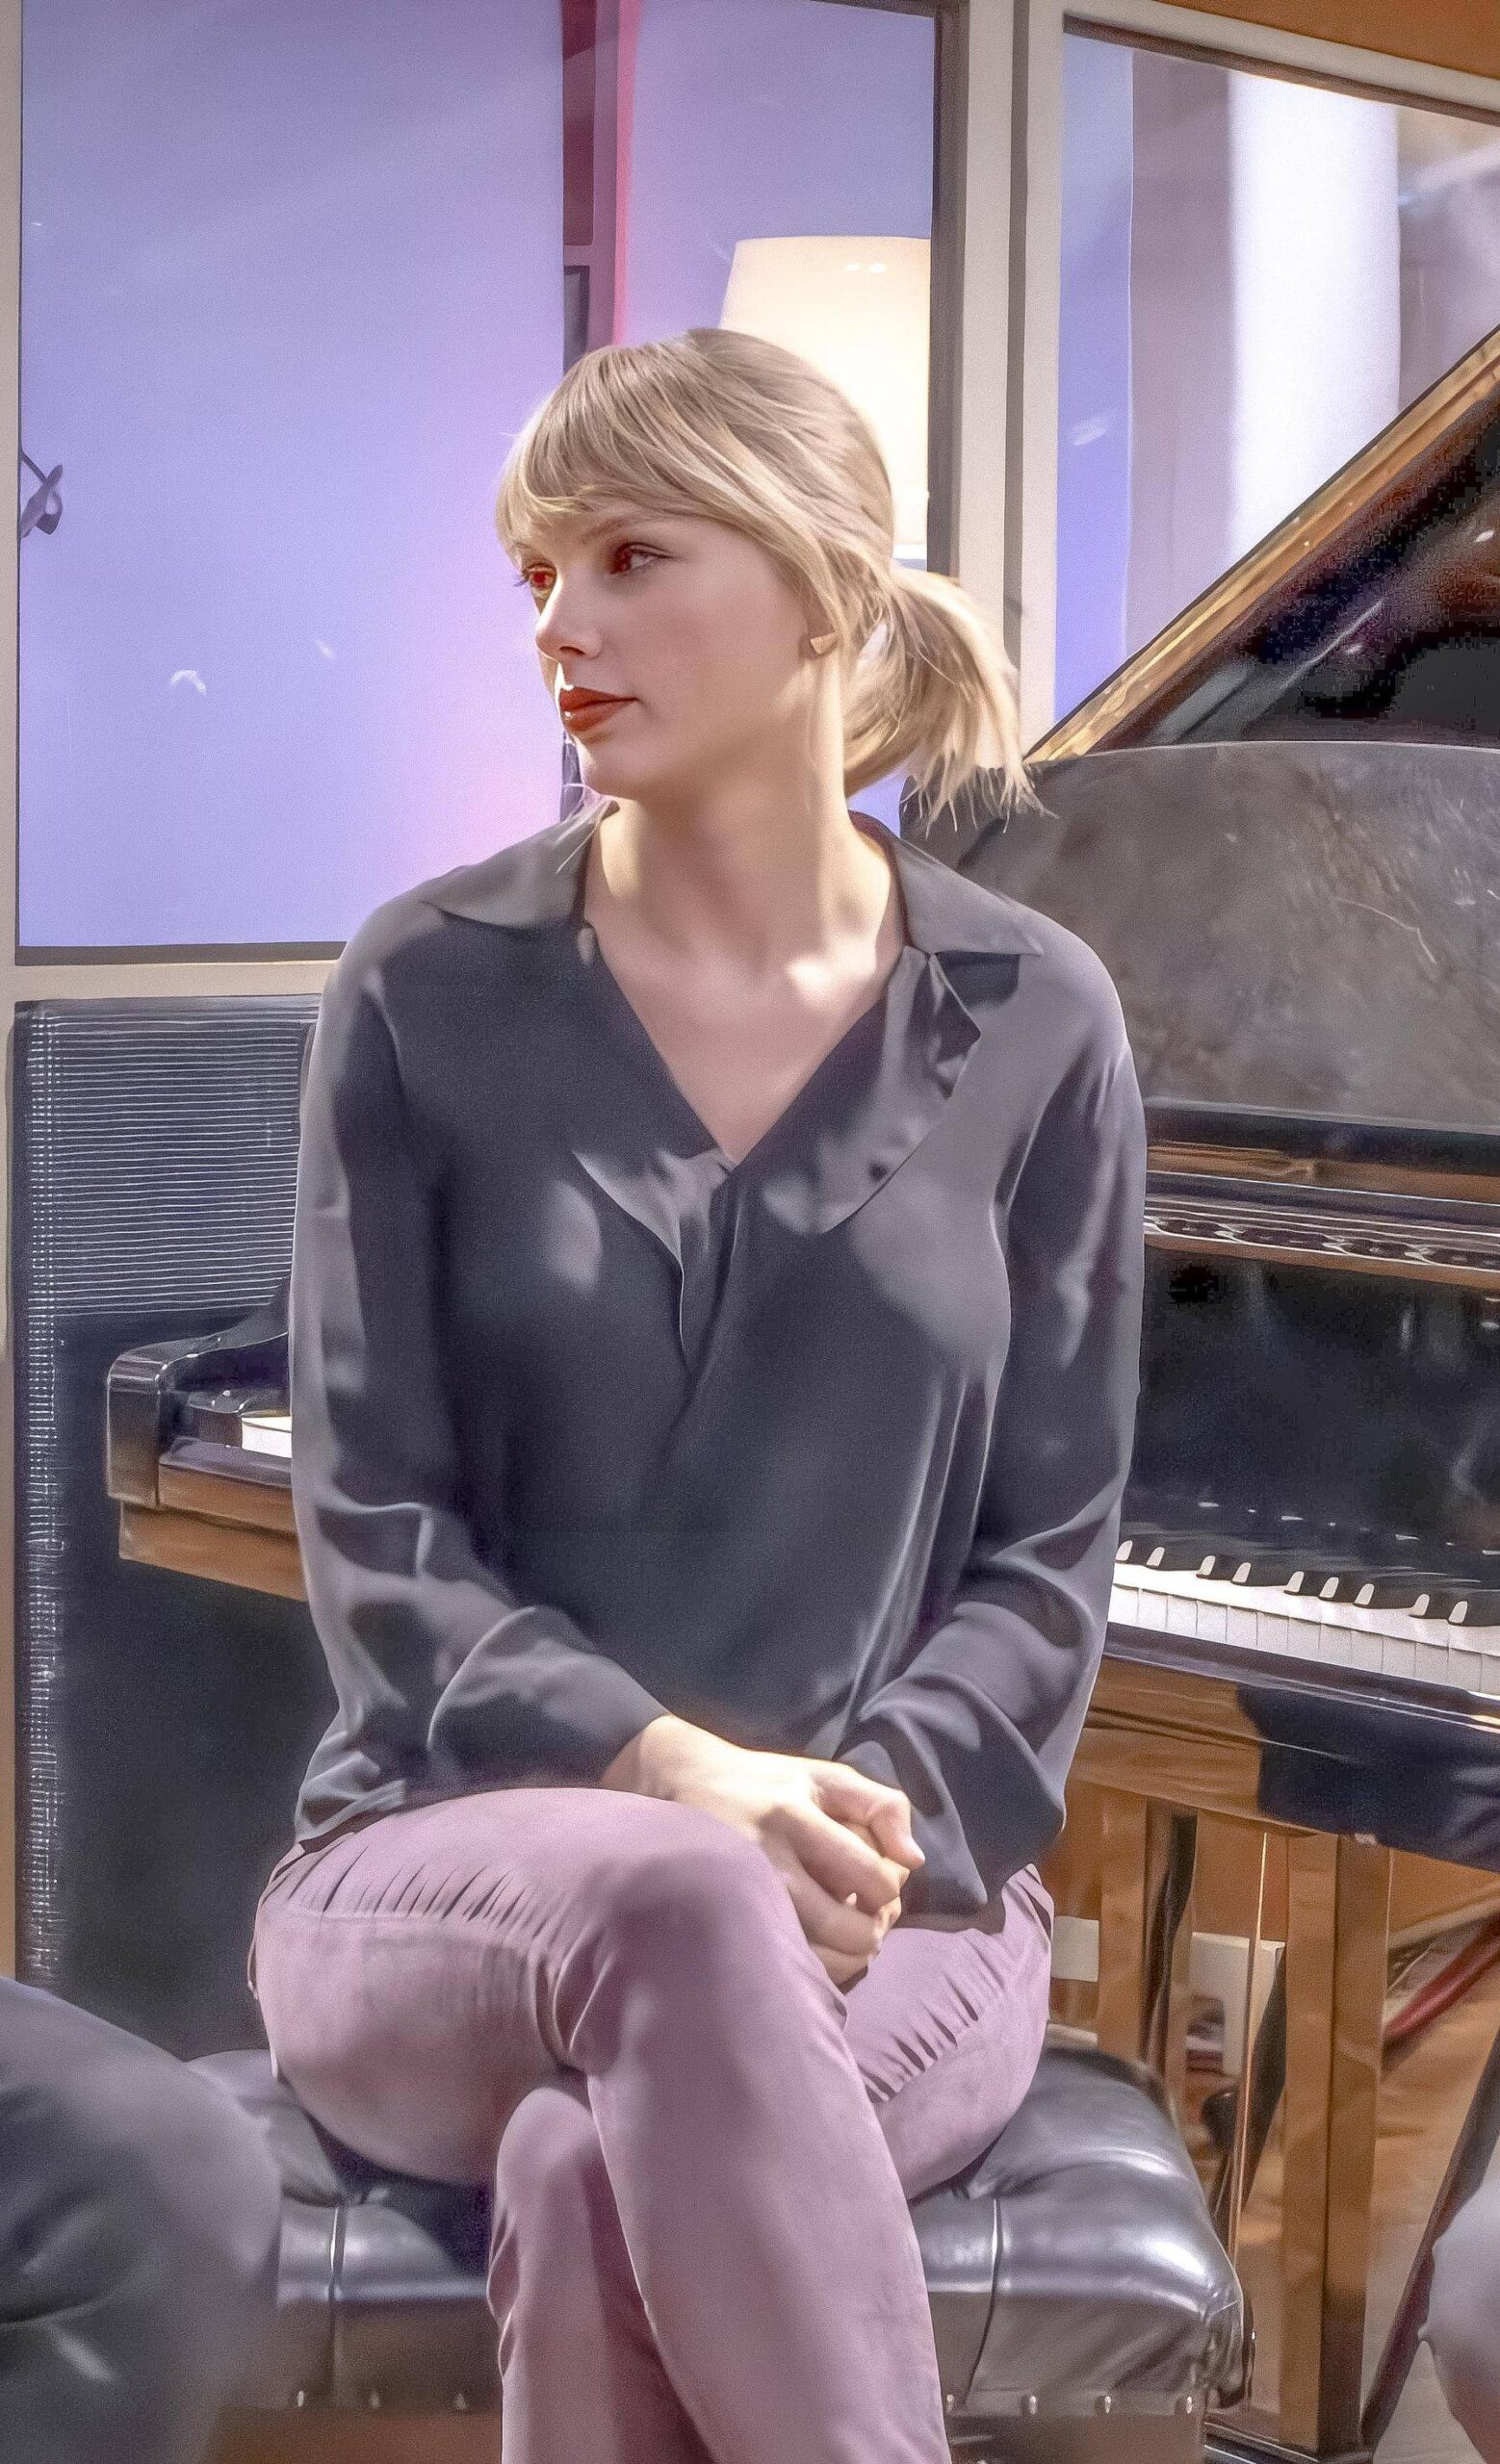 Taylor Swift looks so firm and soft